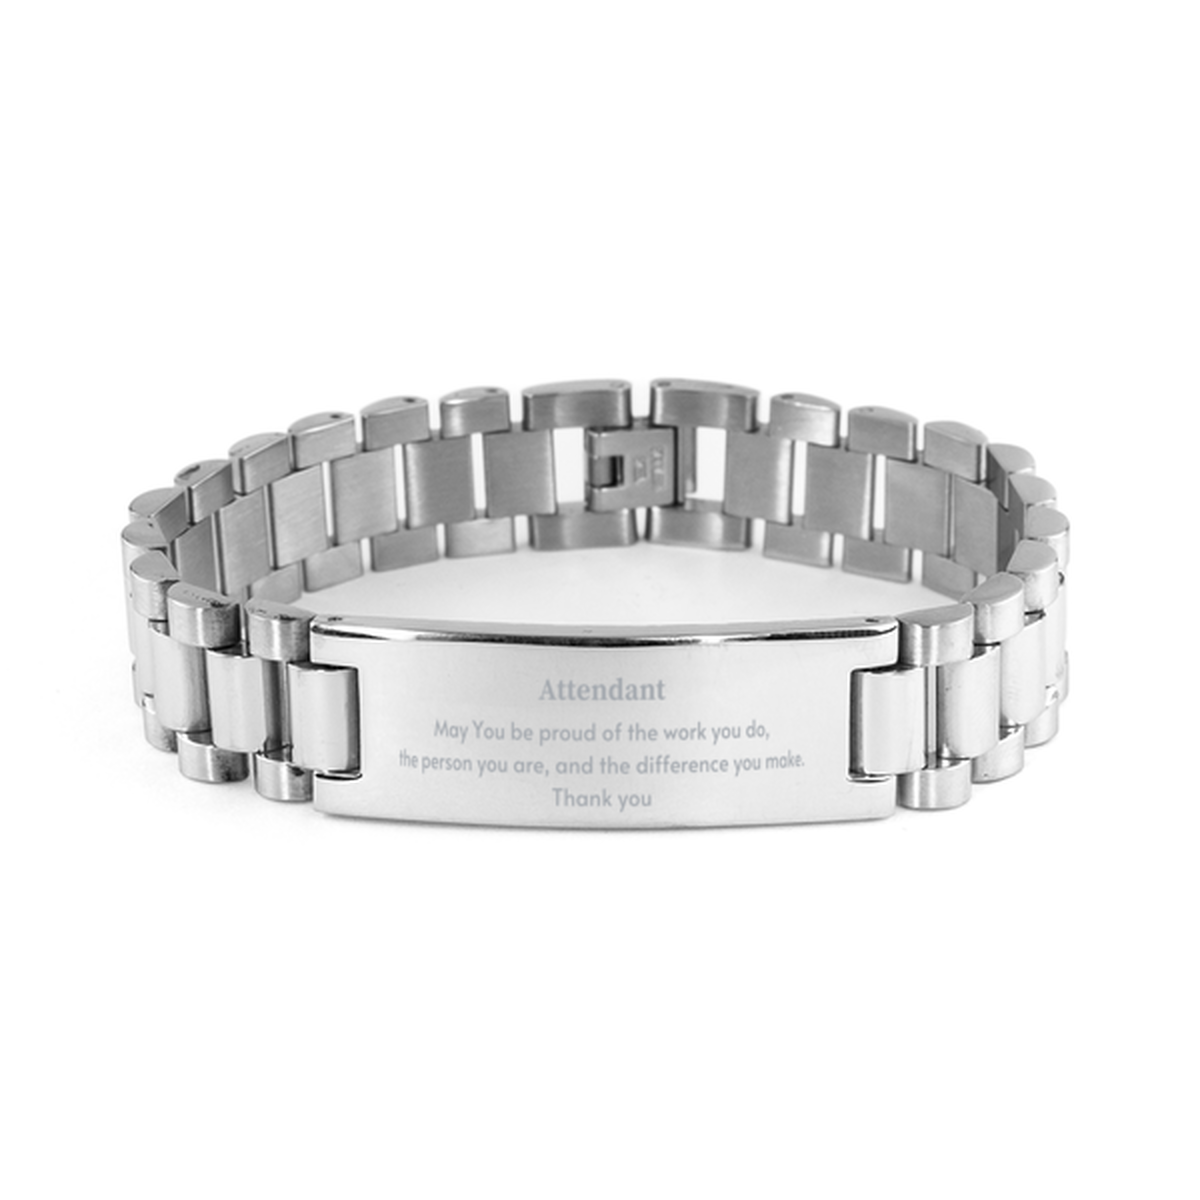 Heartwarming Ladder Stainless Steel Bracelet Retirement Coworkers Gifts for Attendant, Attendant May You be proud of the work you do, the person you are Gifts for Boss Men Women Friends